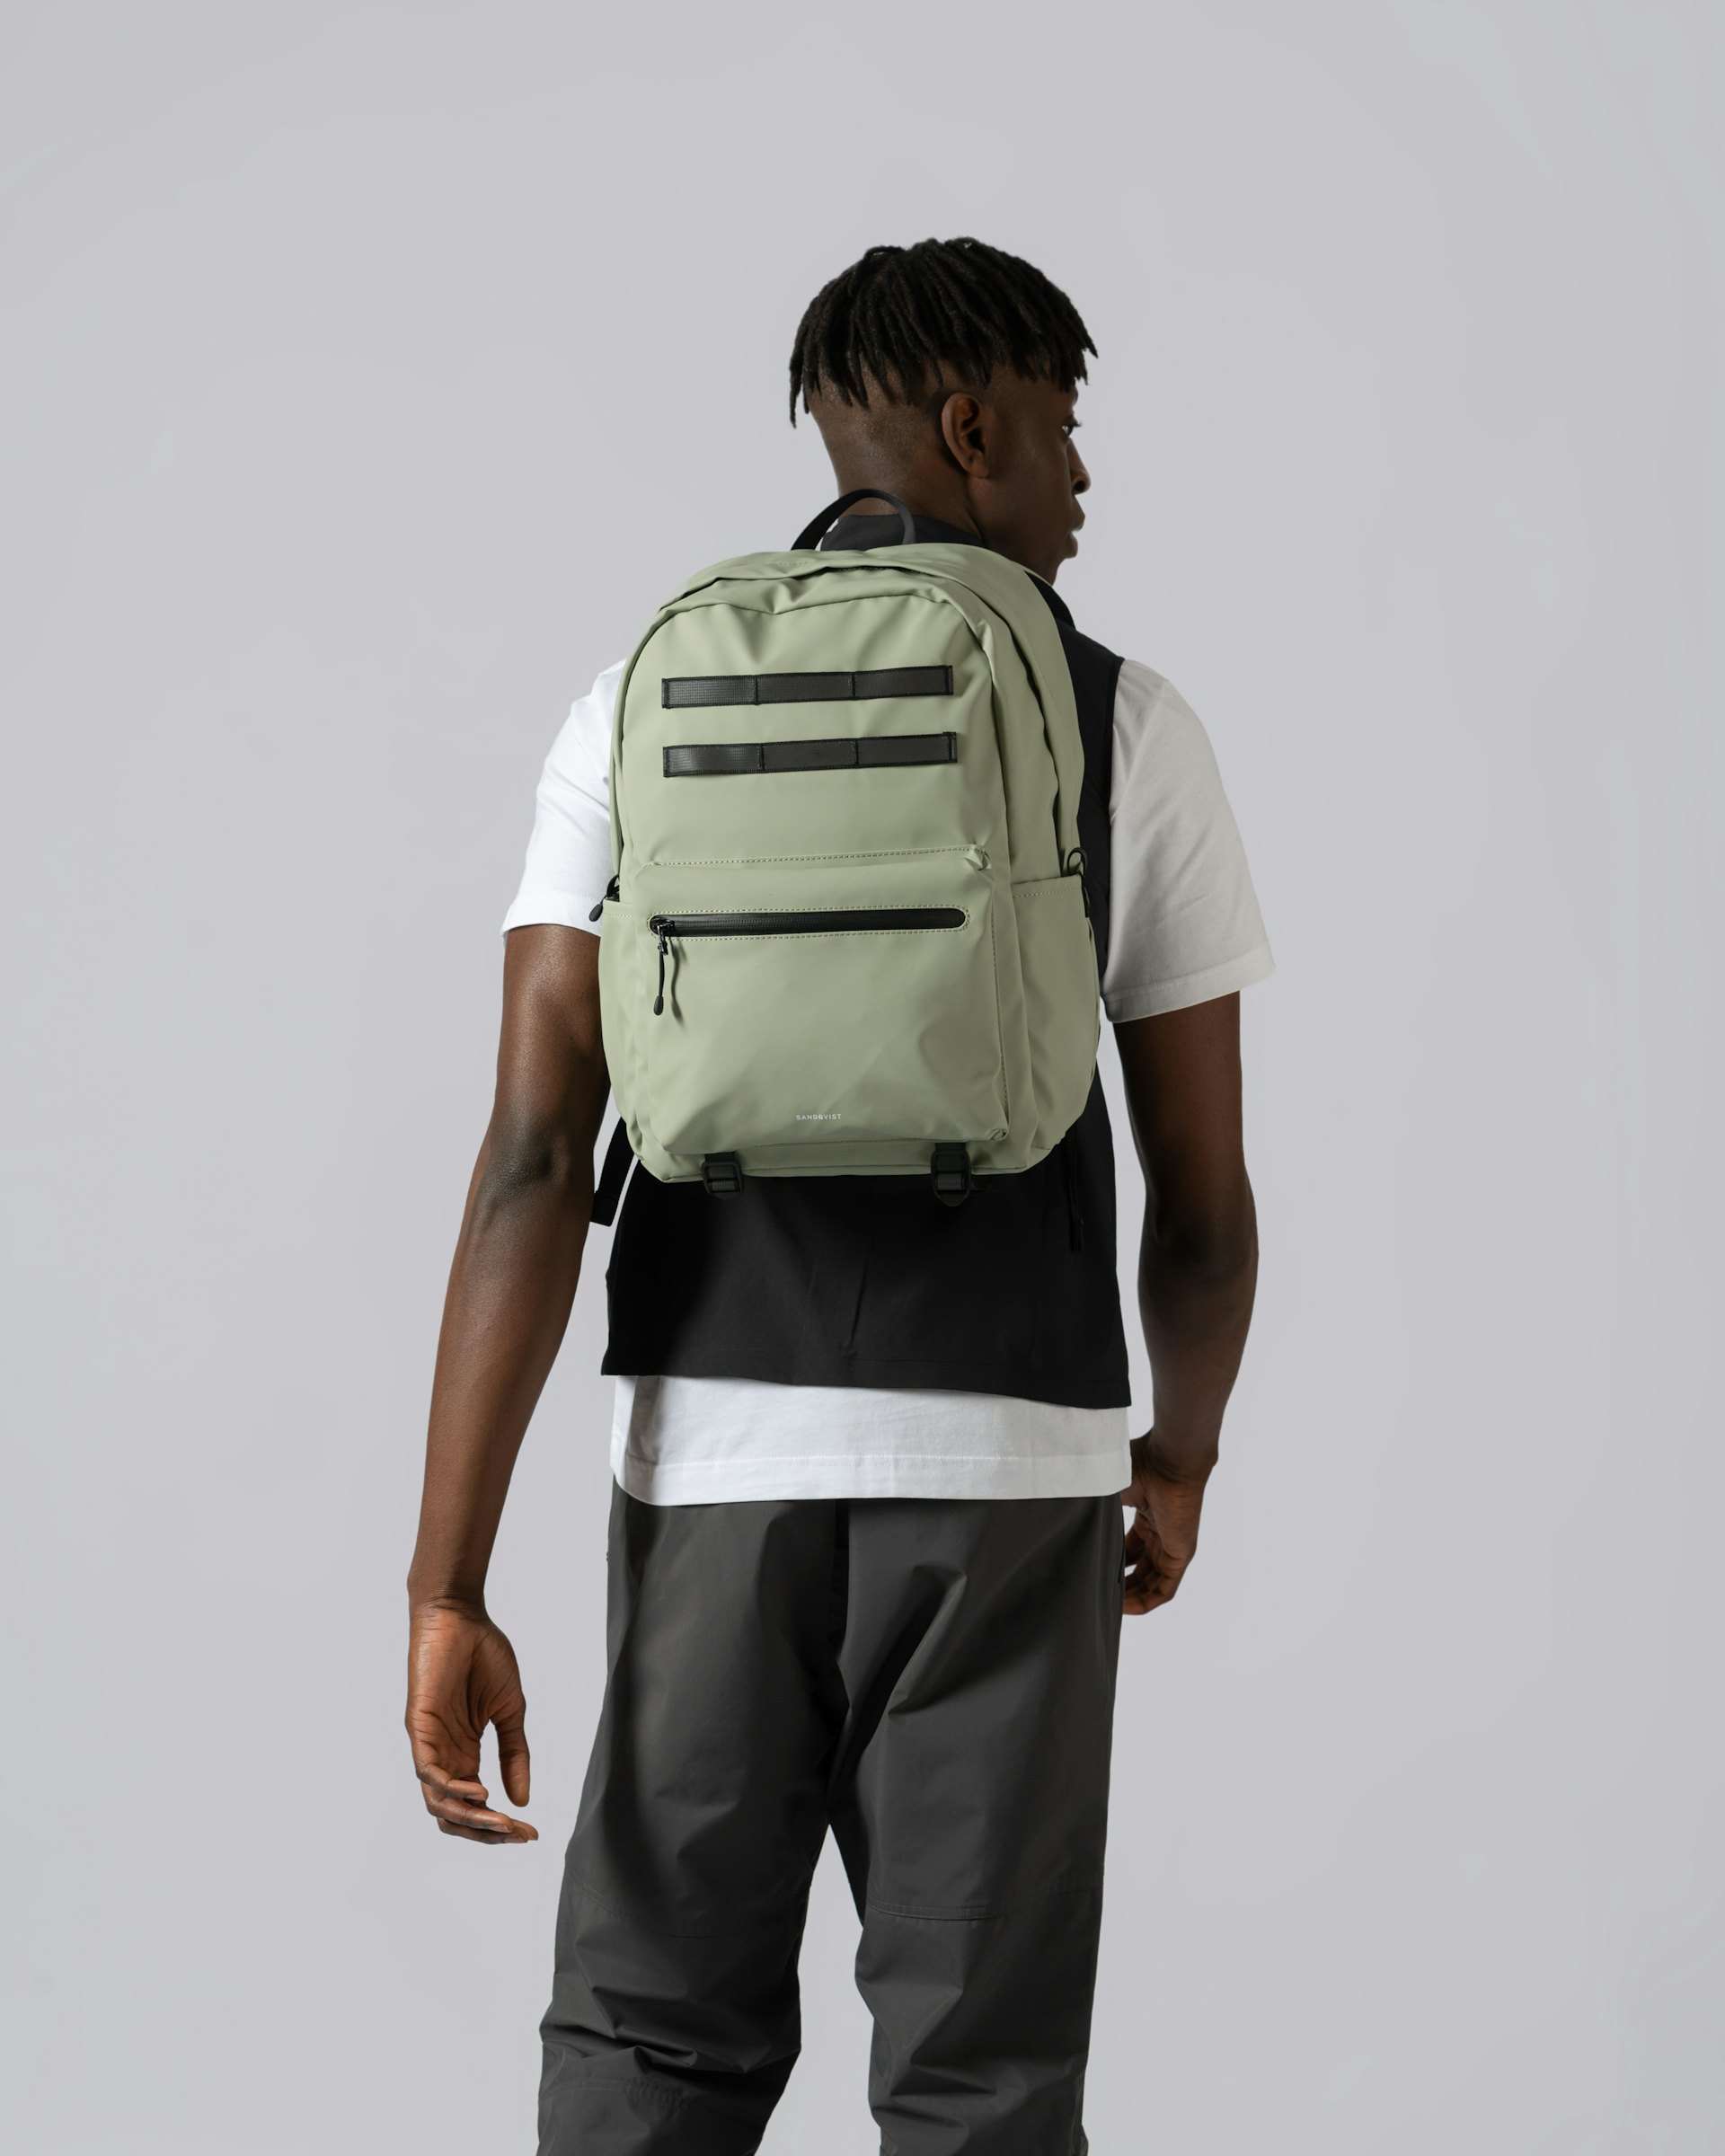 Alvar belongs to the category Backpacks and is in color dew green (6 of 6)